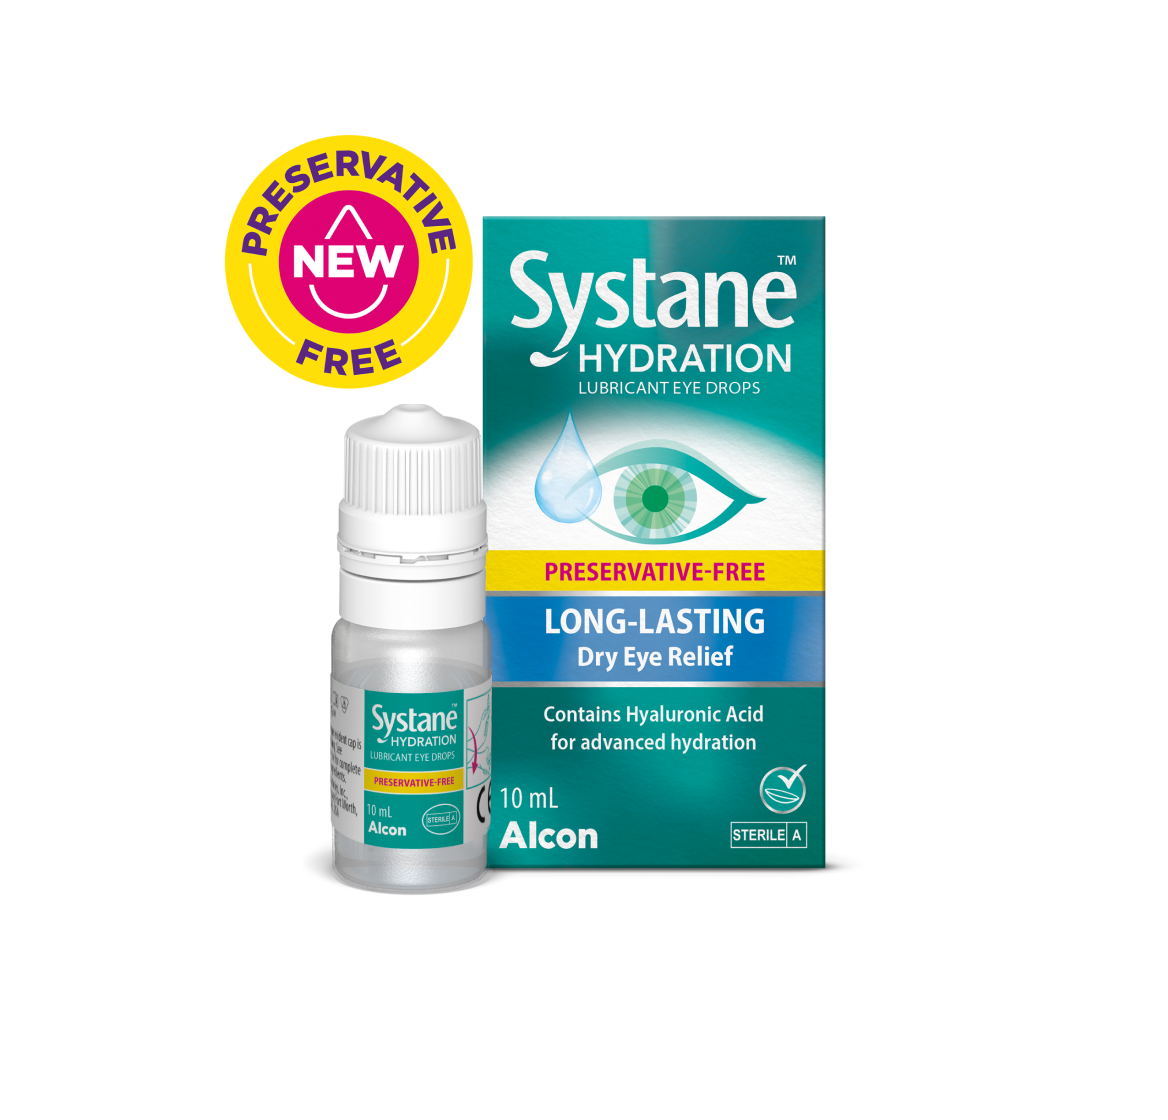 Systane Hydration Unit Dose Lubricant Eye Drops vial and product box